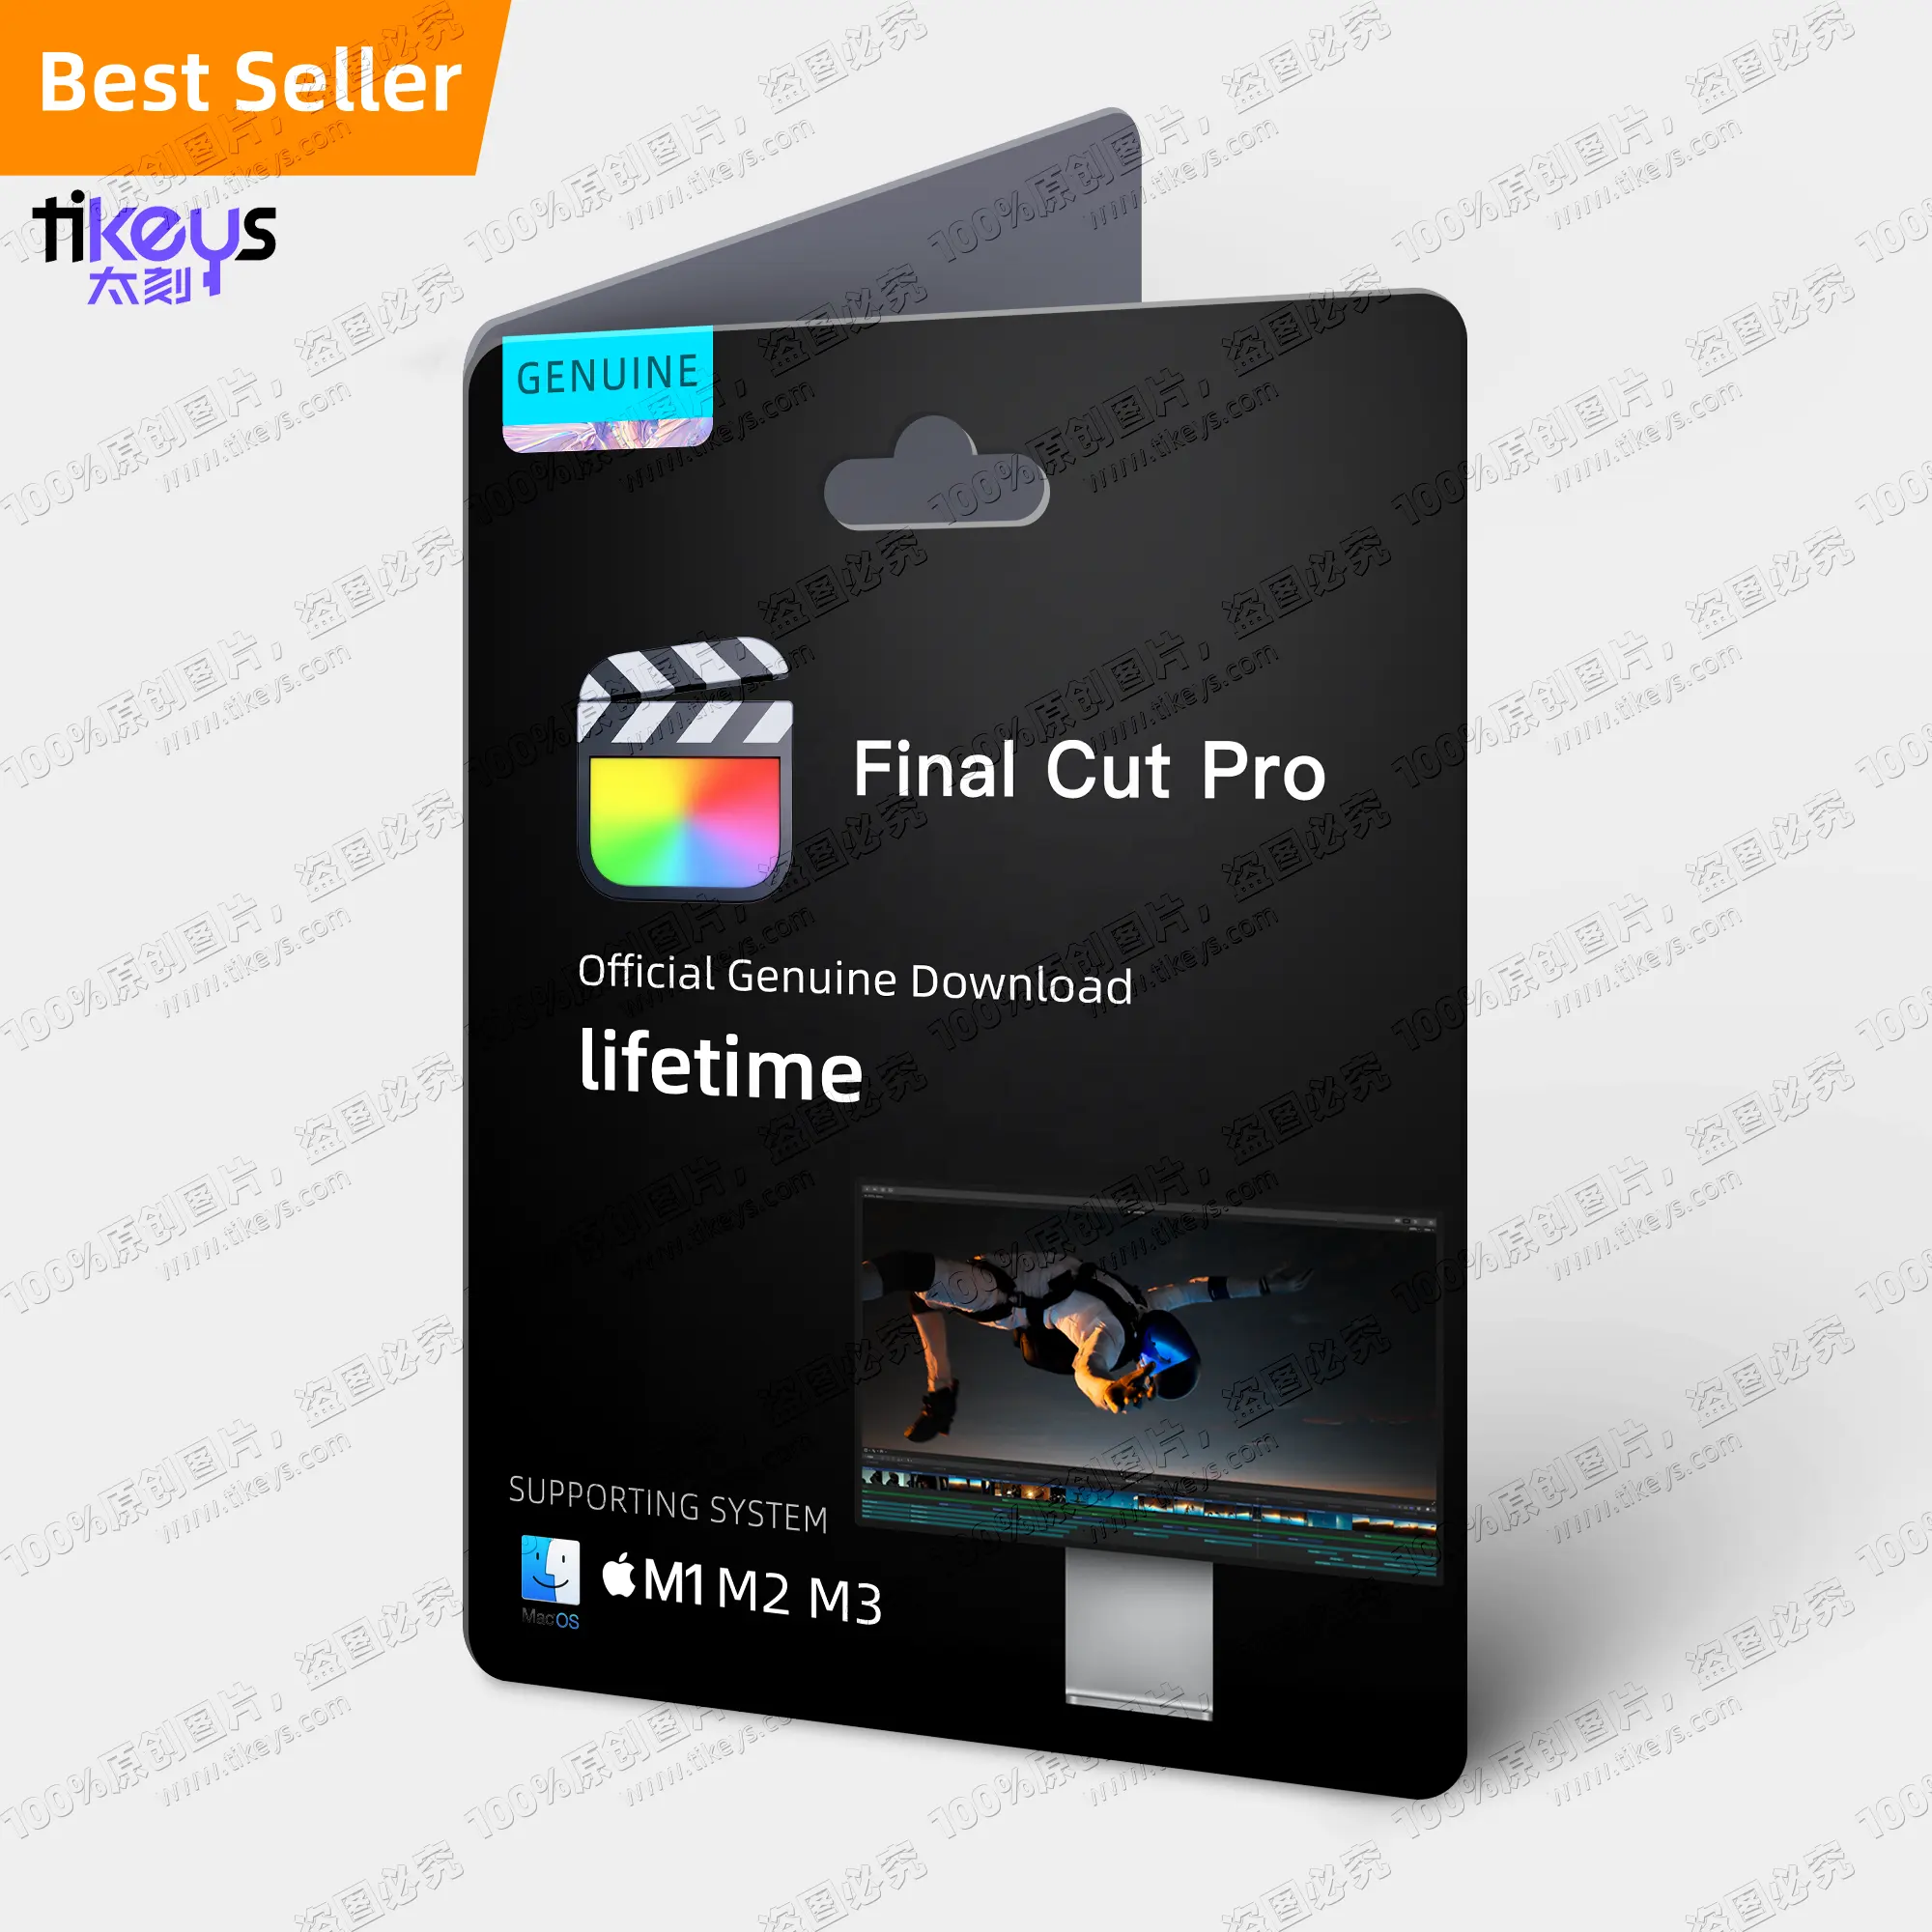 24/7 Online Final Cut Pro X for Mac/M1/M2/M3 Send Account Official Genuine Download Lifetime Video Editing Software